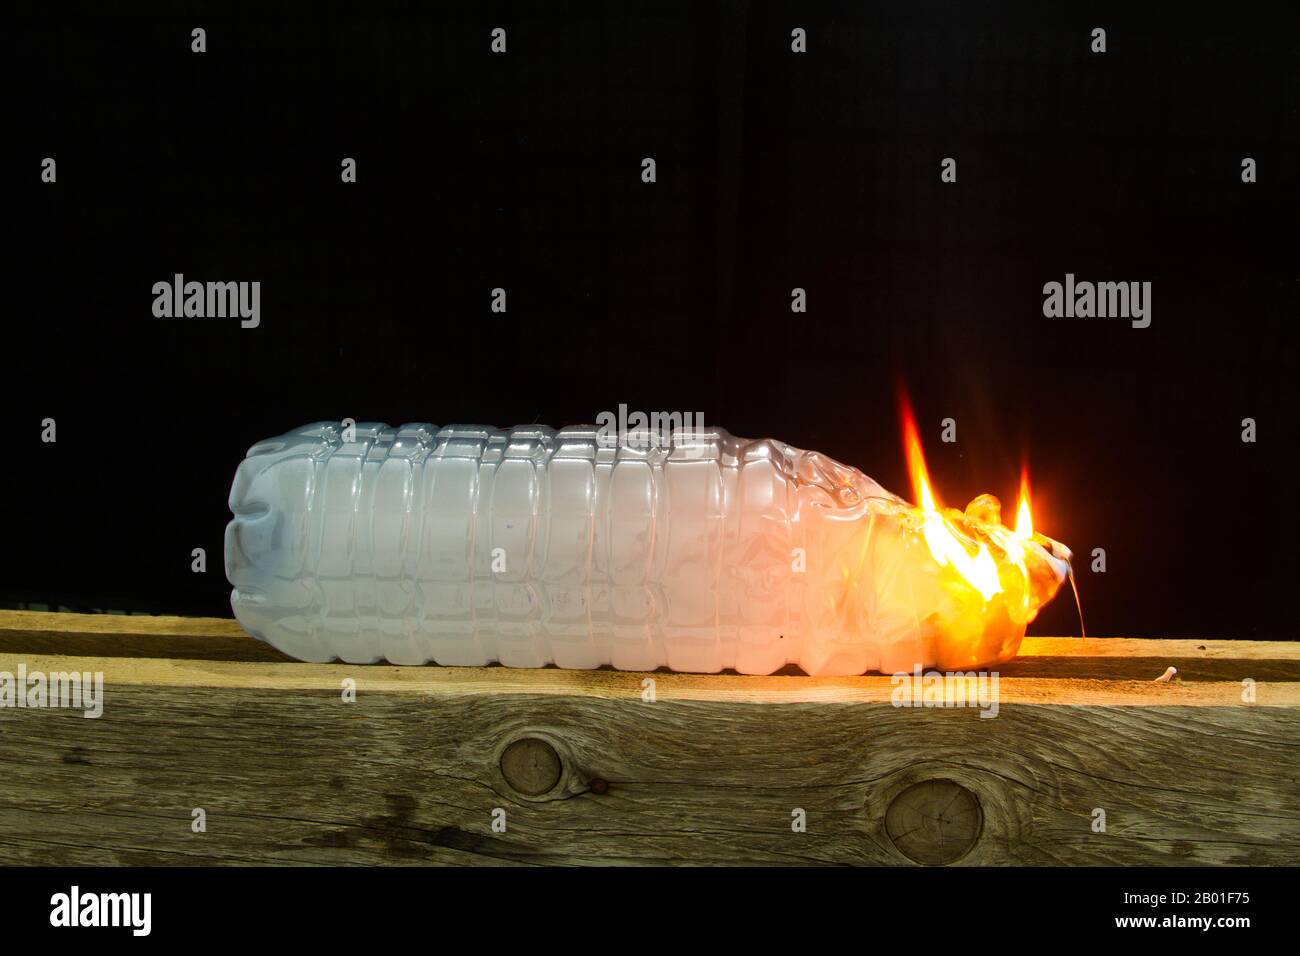 inflamed plastic bottle filled with toxic smoke that burns and burns out leaving toxic smoke on a black background Stock Photo